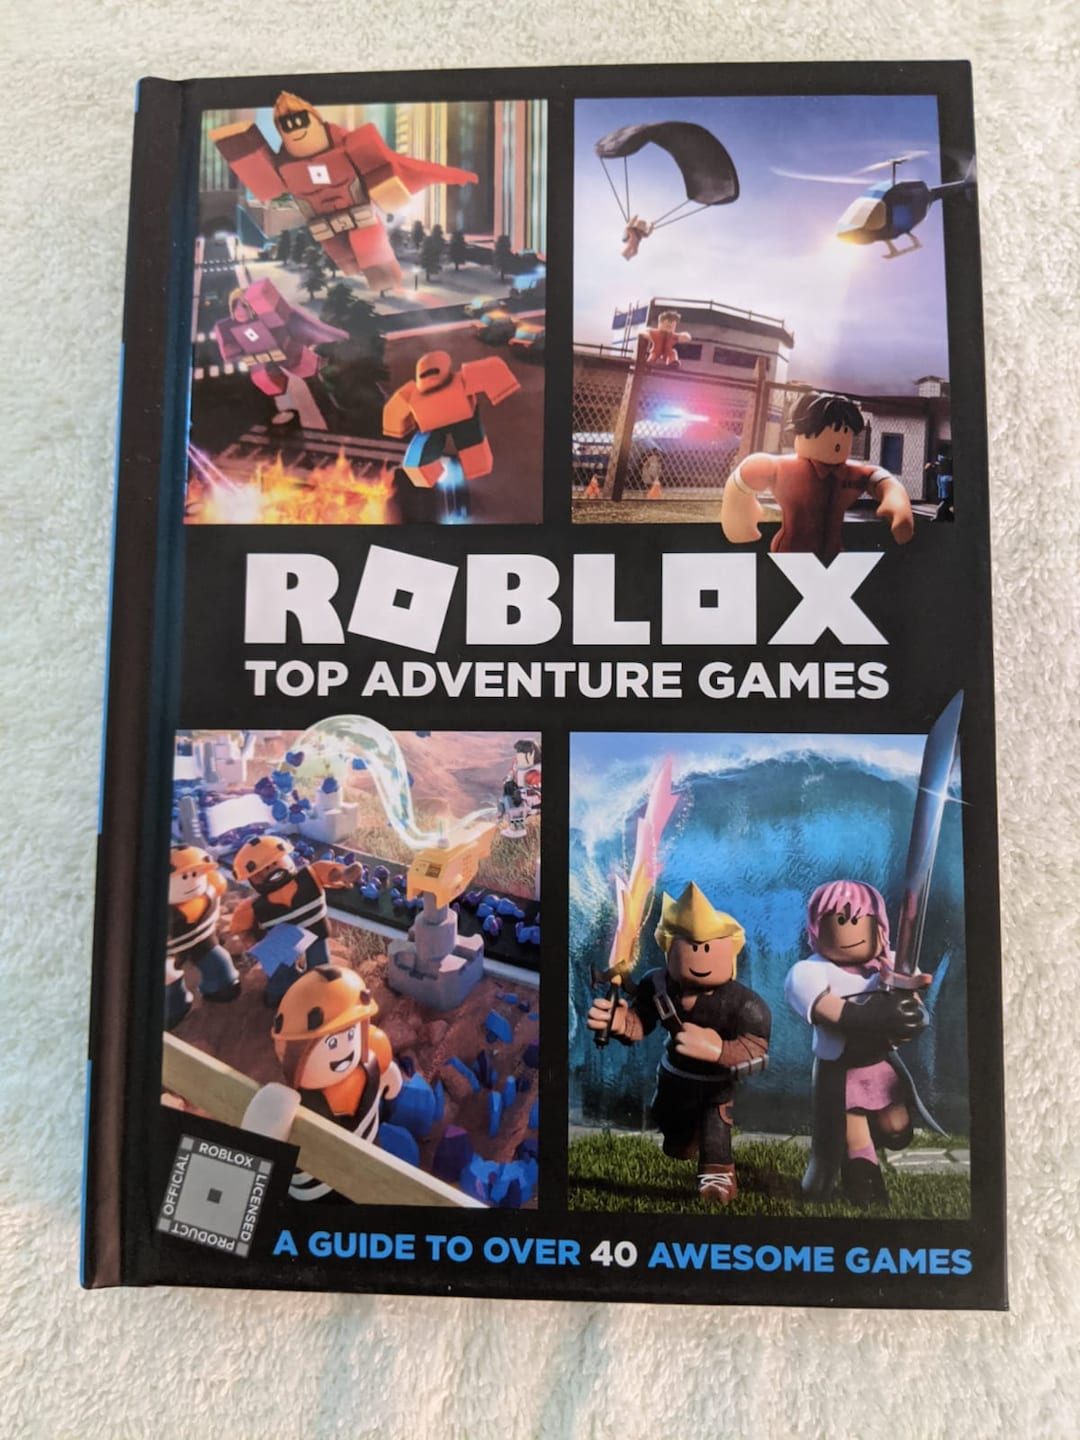 Best ROBLOX Games for Adults - Roblox Guide - IGN